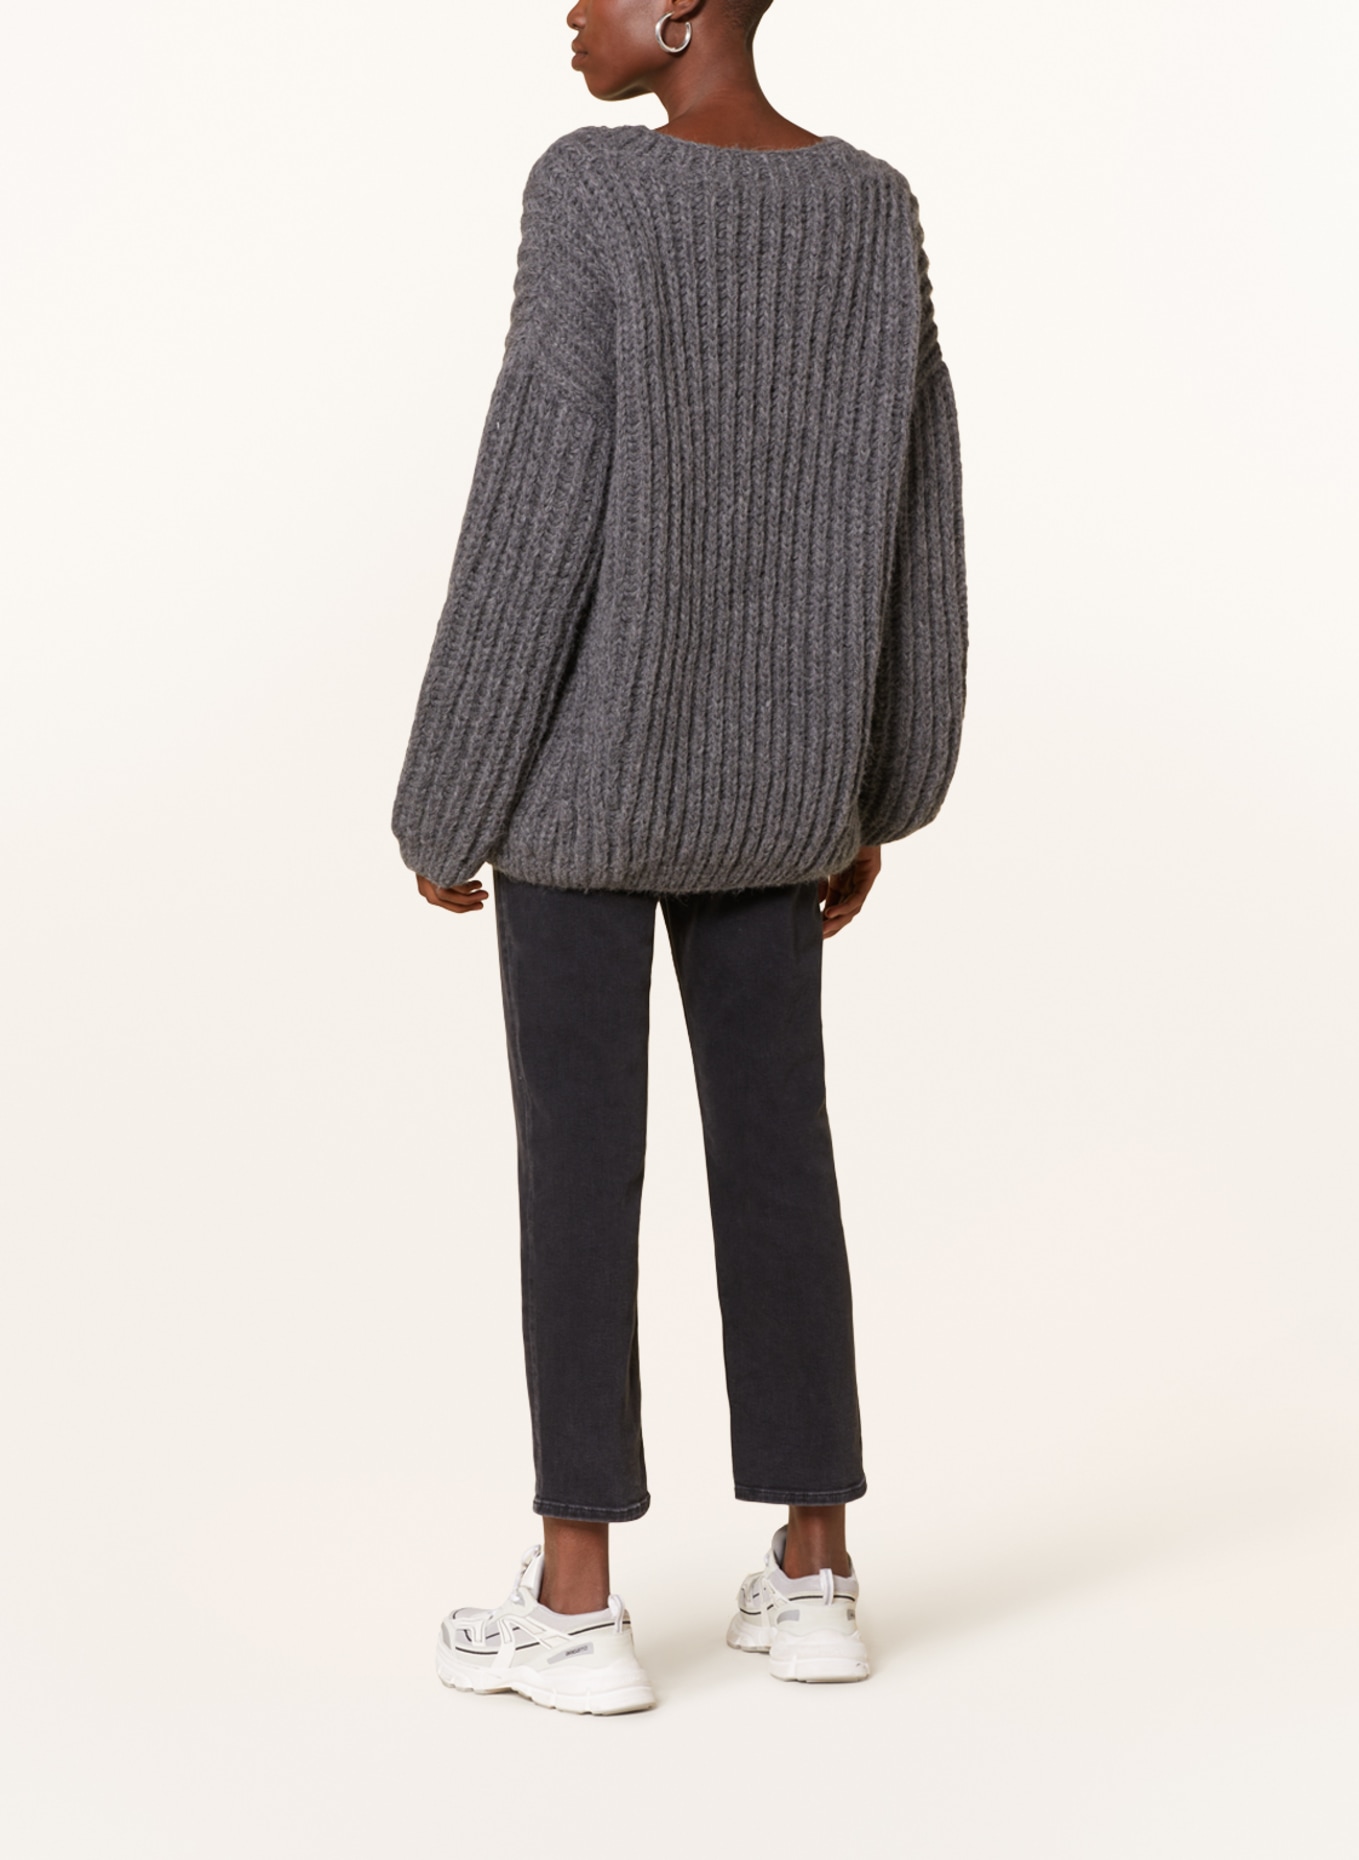 MAIAMI Oversized sweater made of alpaca, Color: GRAY (Image 3)